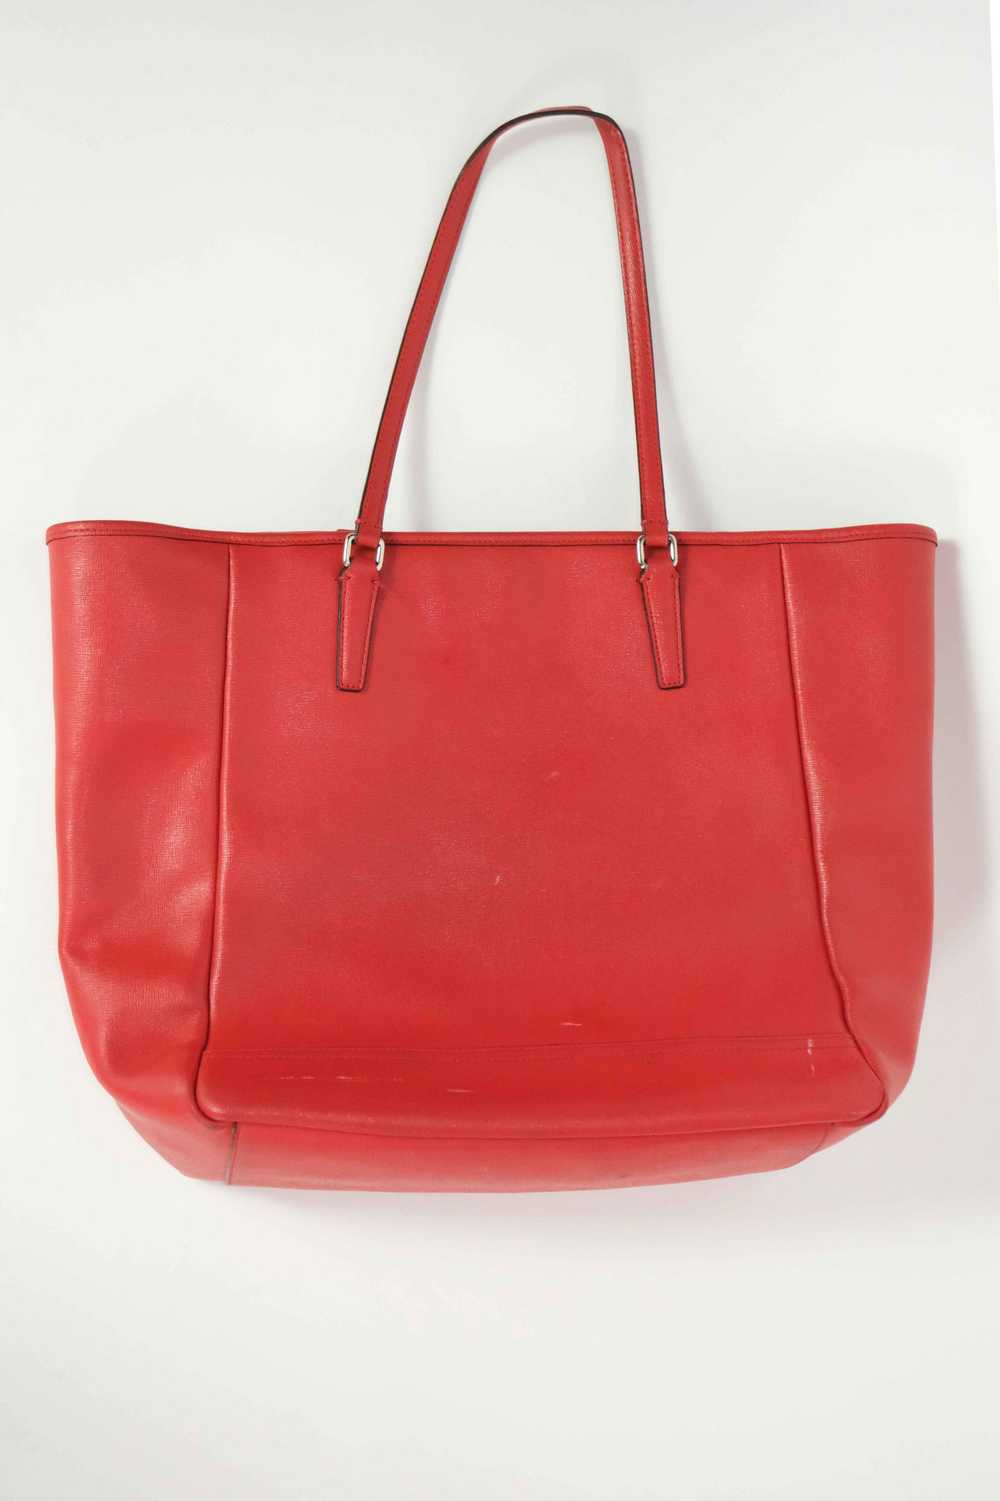 Cherry Red Coach Tote - image 4